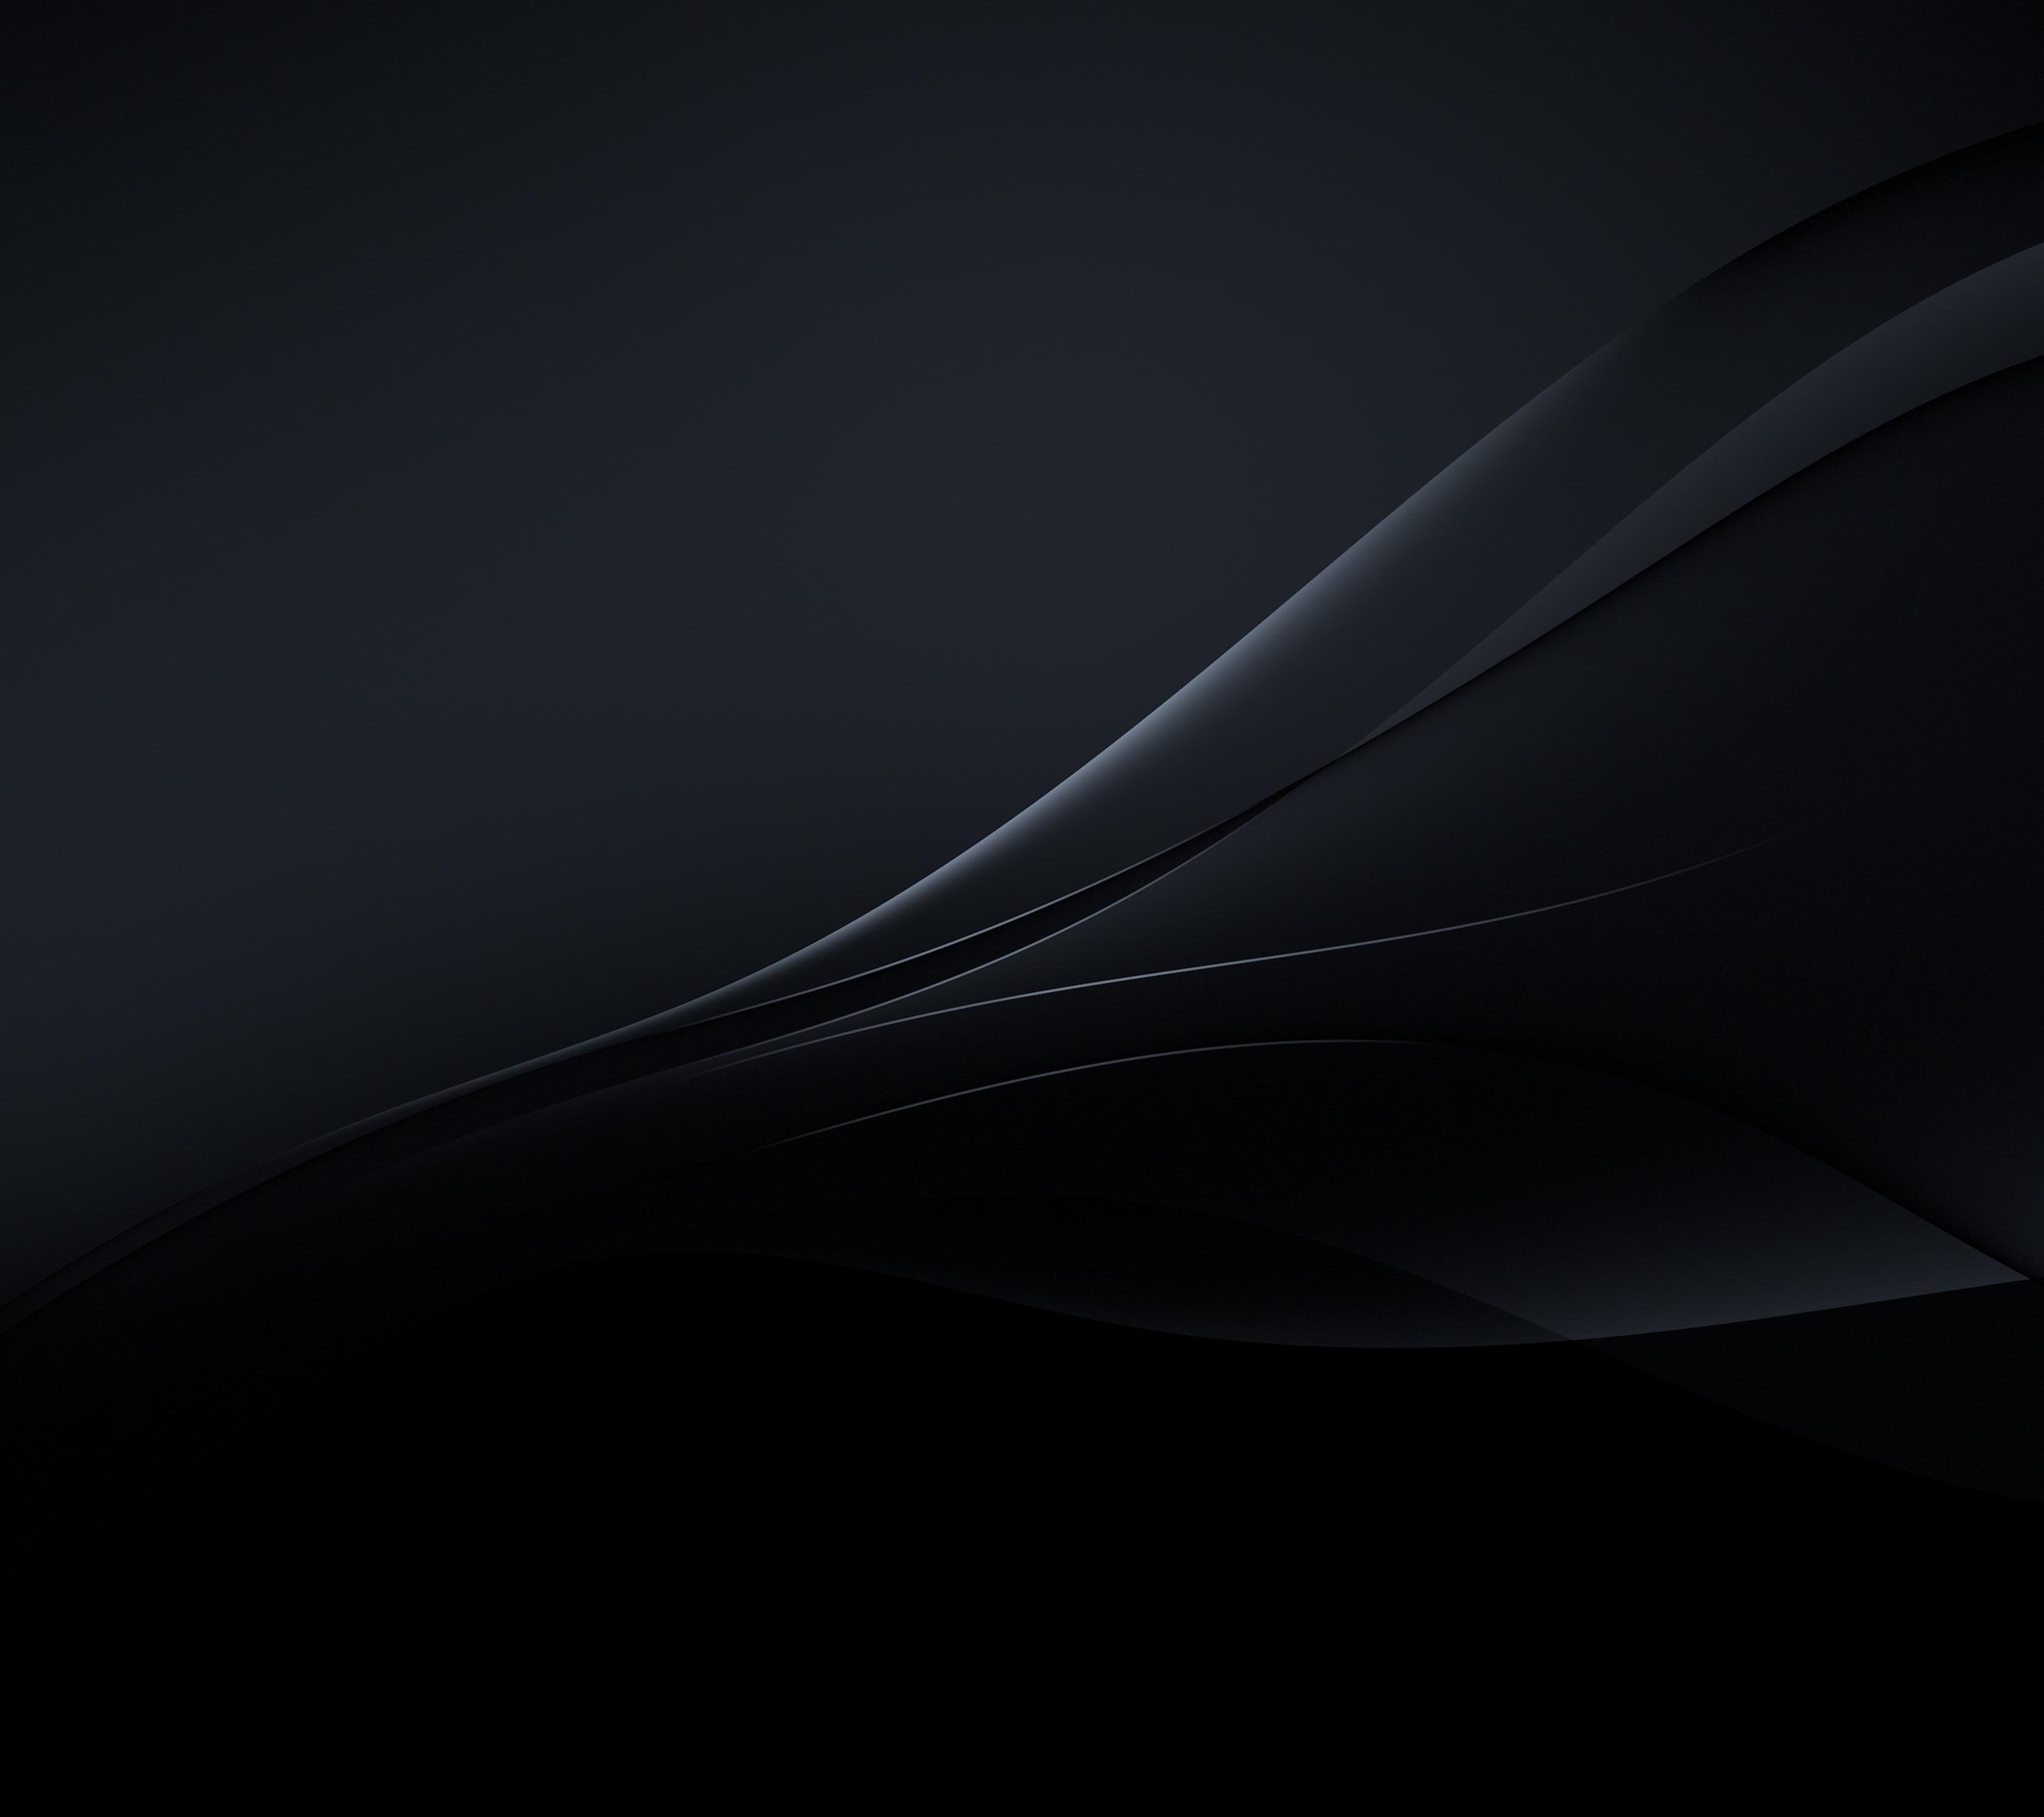 Sony Xperia Z Wallpapers - Wallpaper Cave